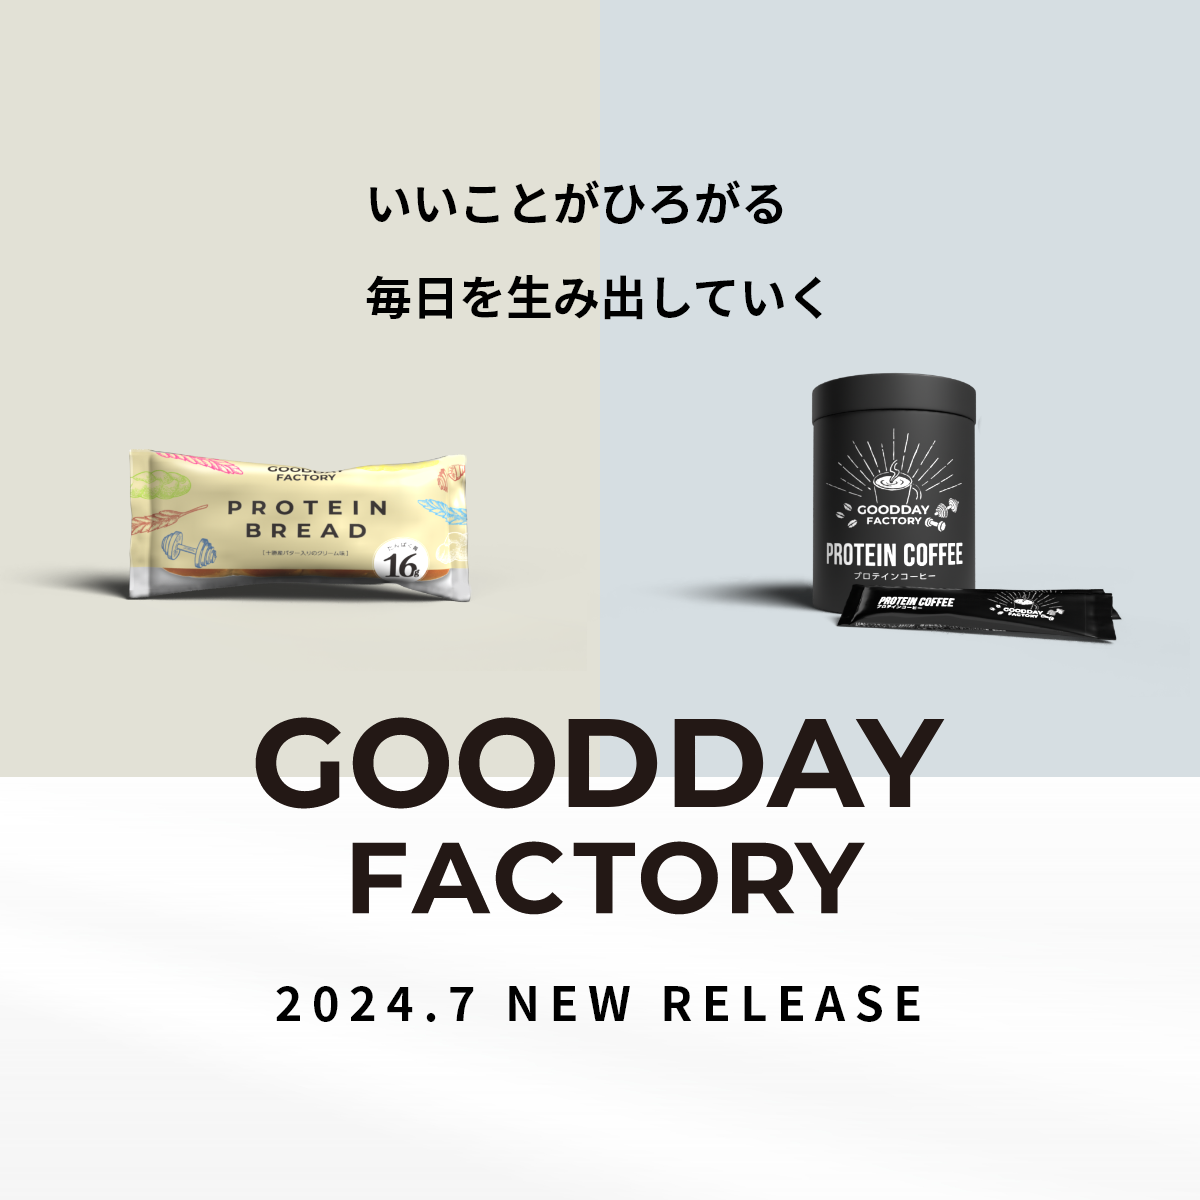 GOODDAY FACTORY